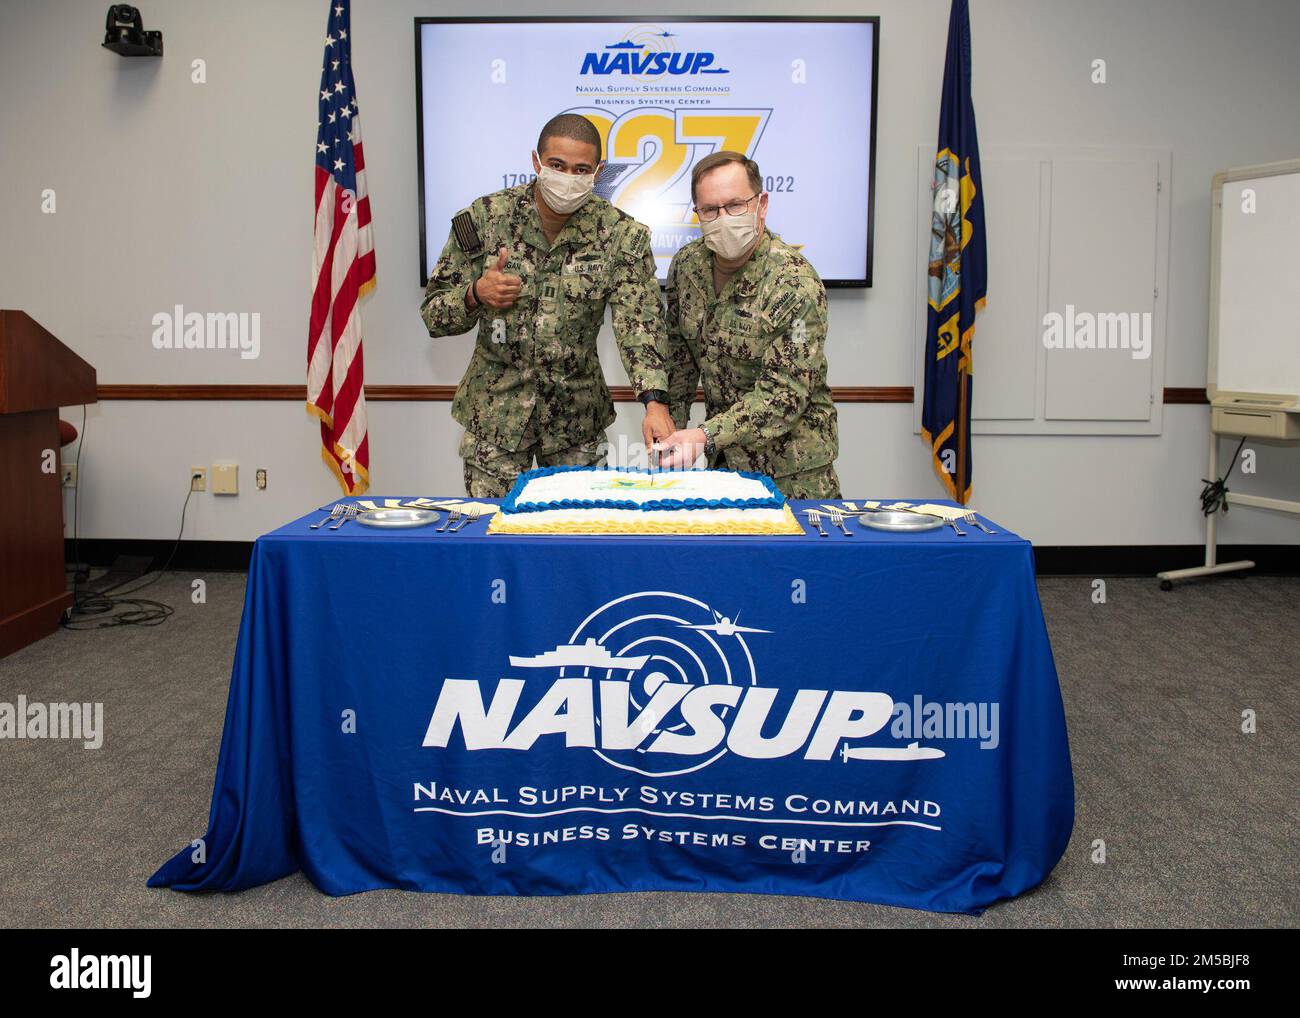 220223-N-PX557-0020  MECHANICSBURG, Pa.  (February 23, 2022)  Lt. Terry Hogan, project officer, assigned to Naval Supply Systems Command (NAVSUP) Business Systems Center (BSC), and Capt. Gene Cash, commanding officer, NAVSUP BSC, participate in a cake-cutting ceremony commemorating the 227th birthday of the U.S. Navy Supply Corps. Military members serving in the Supply Corps are trained and employed in supply chain management, operational logistics, contract management, financial management, operations research, and business enterprise management. The broad responsibilities of the Supply Corps Stock Photo